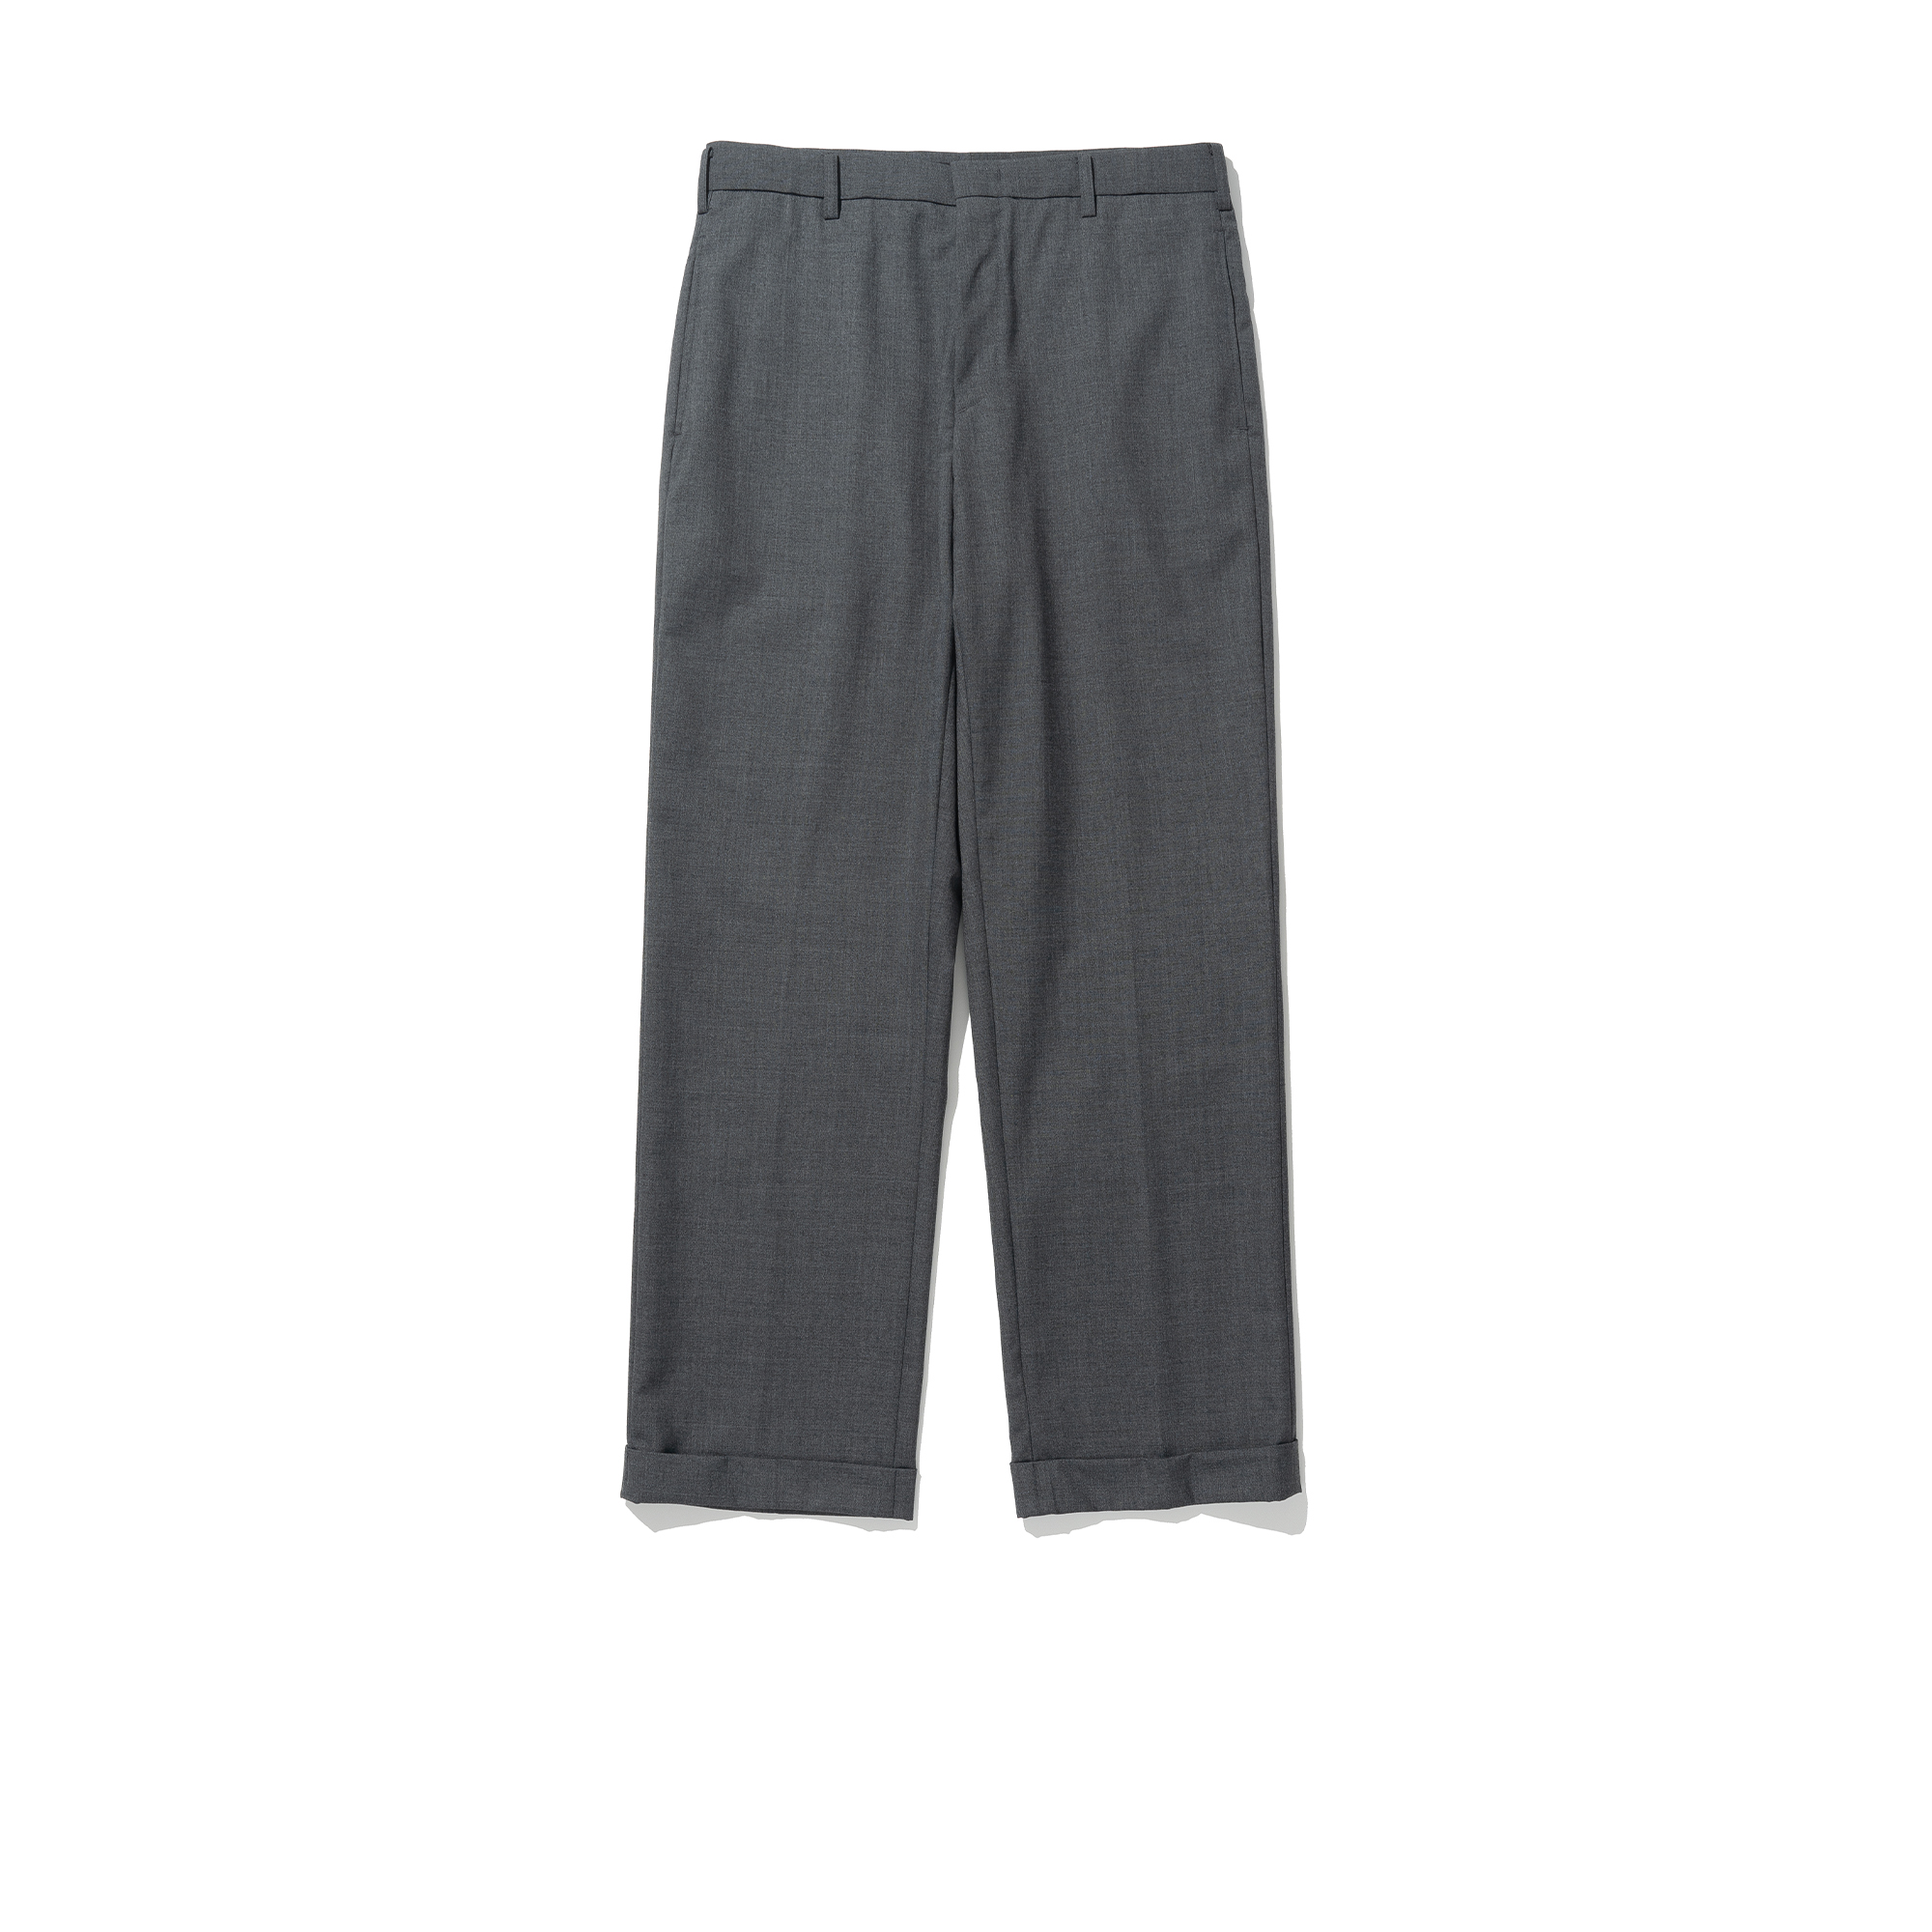 RENACTS X BROWN.OC Wool Piped Stem Trousers [Grey]리넥츠